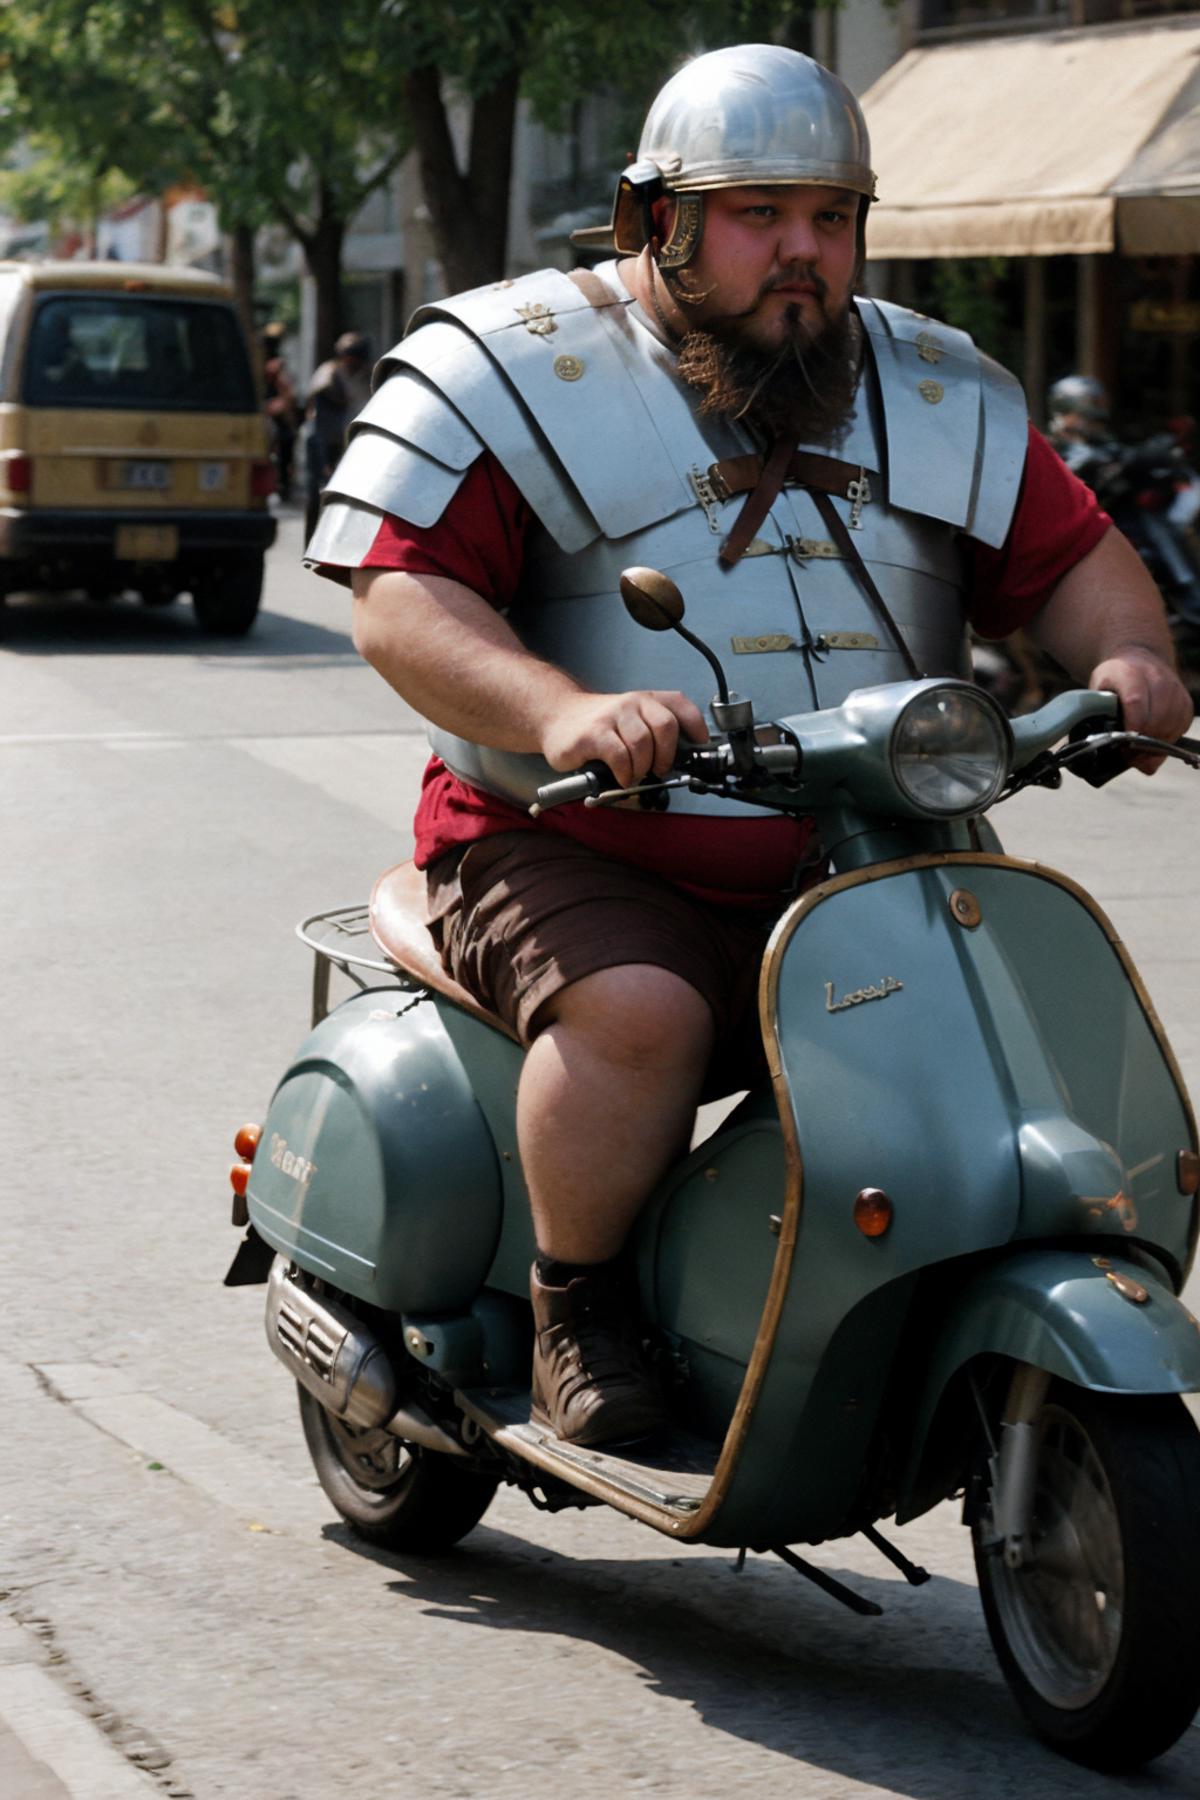 A man wearing a Roman costume riding a blue scooter.